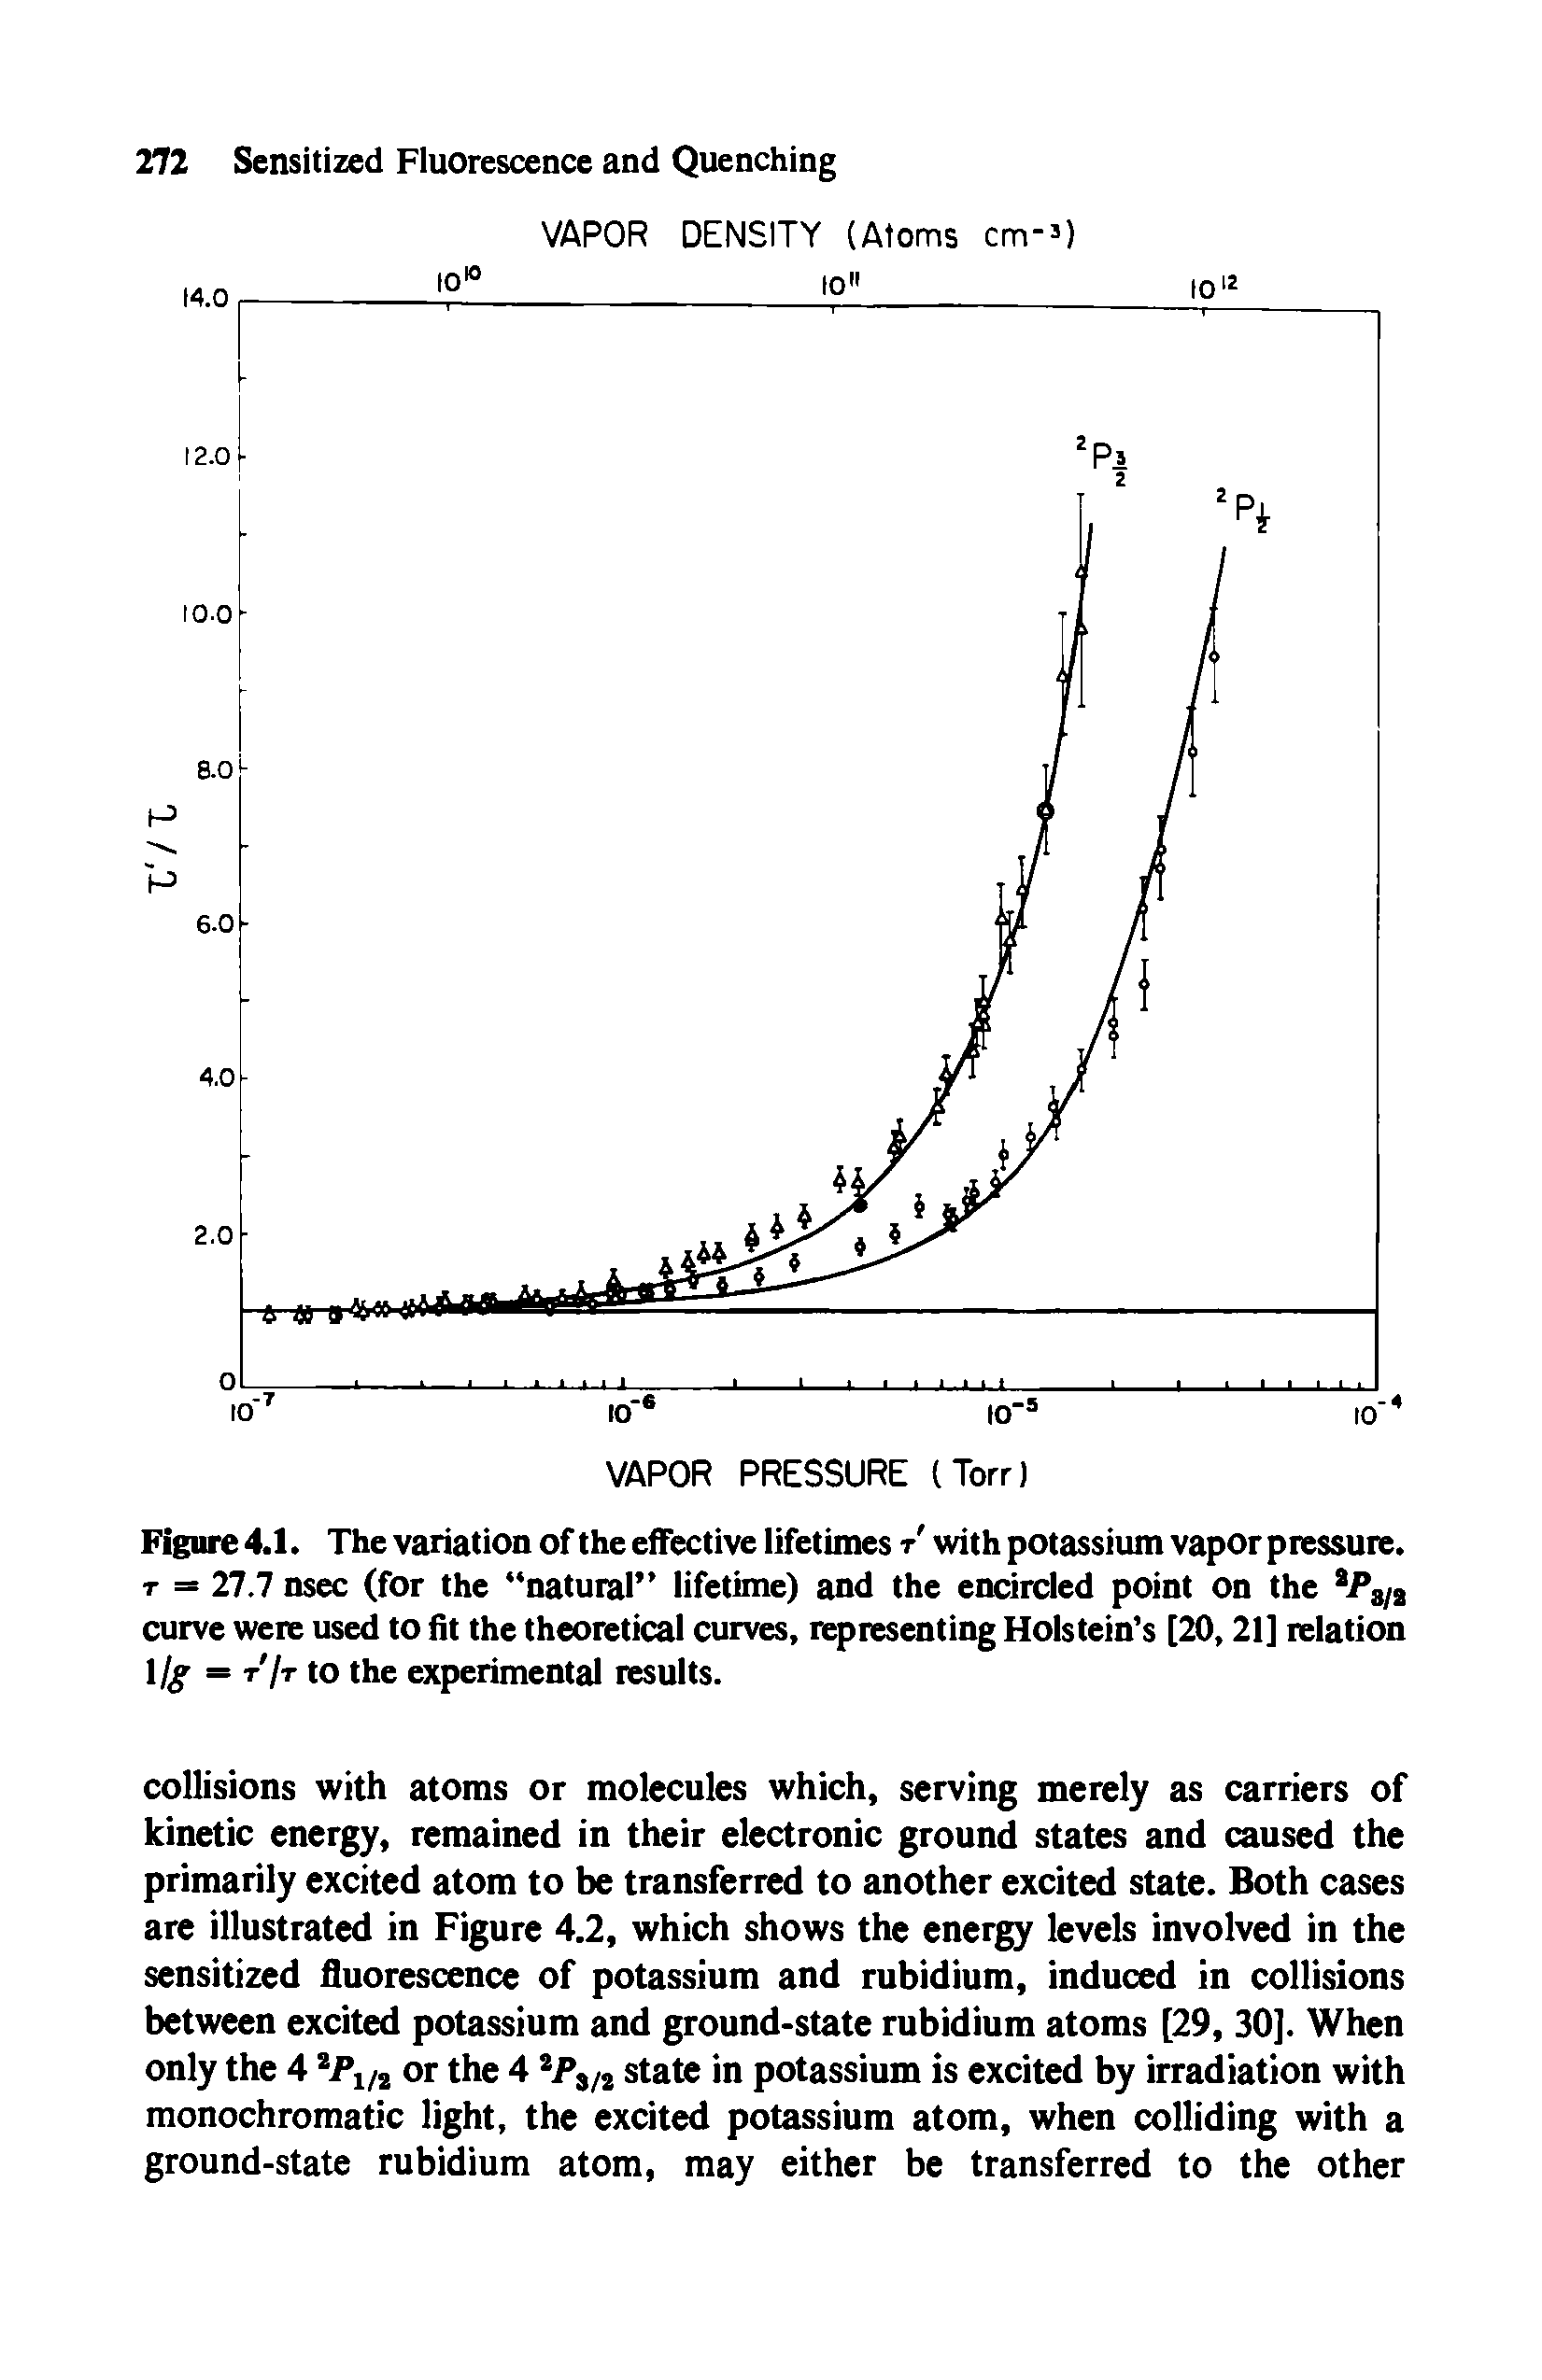 Figure 4.1. The variation of the effective lifetimes / with potassium vapor pressure. t = 27.7 nsec (for the natural lifetime) and the encircled point on the aP3/2 curve were used to fit the theoretical curves, representing Holstein s [20,21] relation 1 lg = t jr to the experimental results.